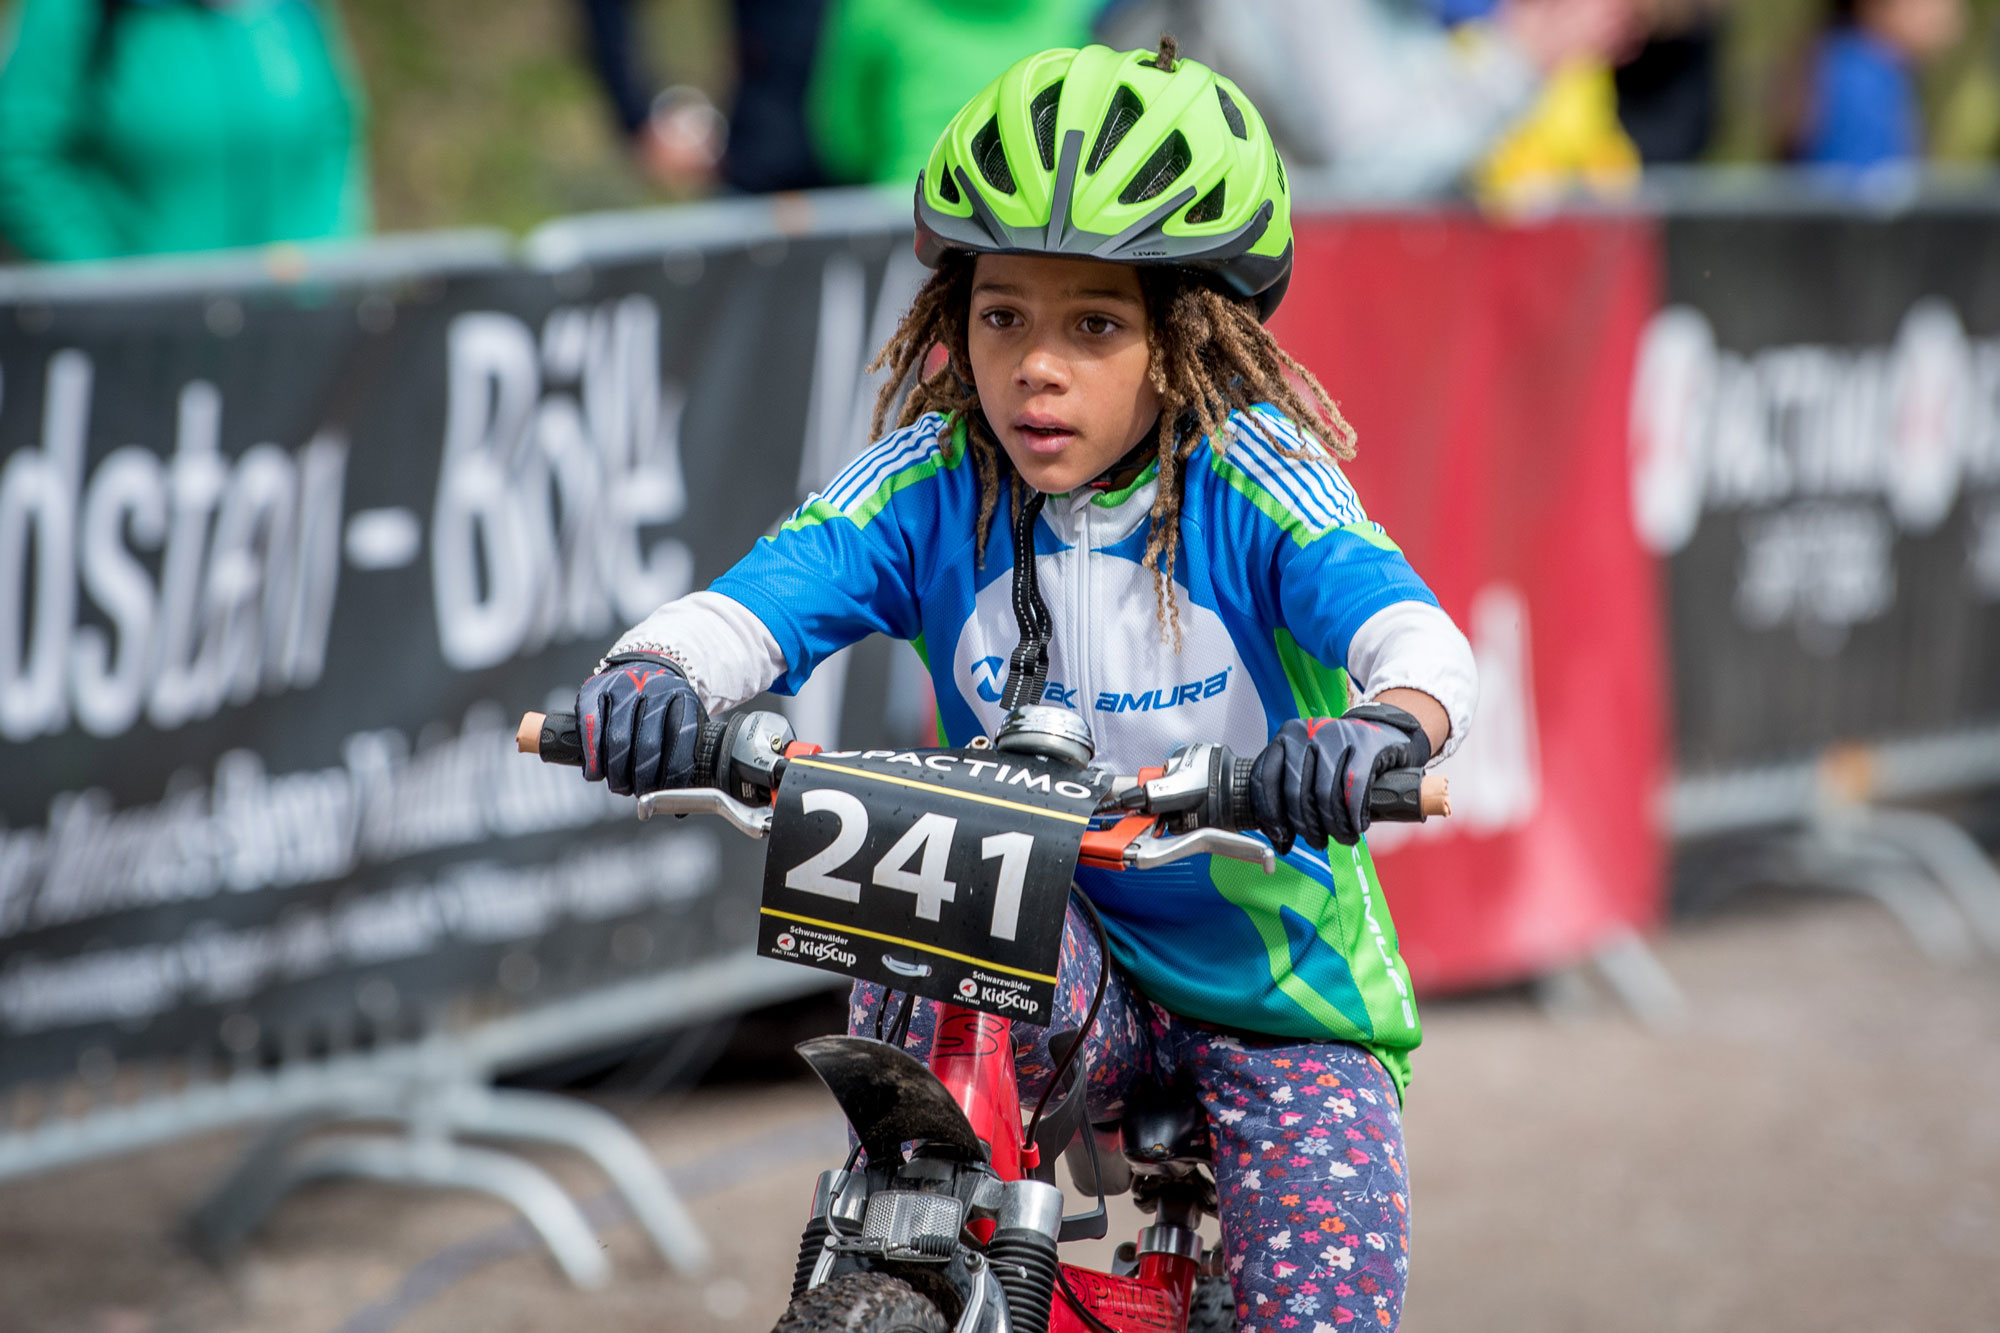 Pactimo Kids Cup